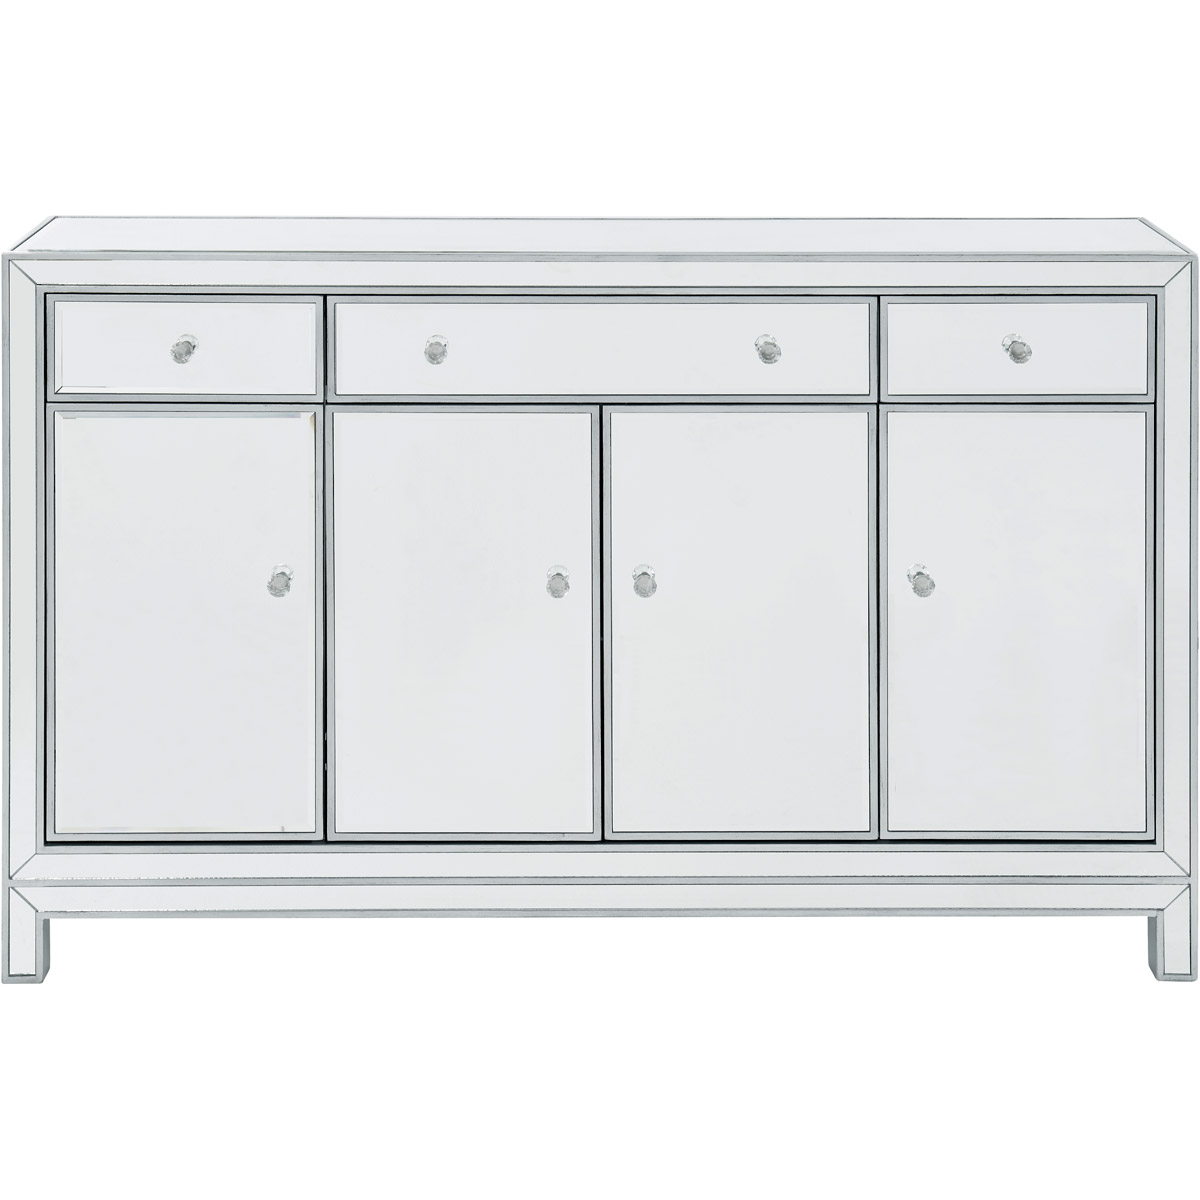 Mf72001 Buffet Cabinet 3 Drawers 4 Doors, Antique Silver Paint - 56 X 13 X 36 In.